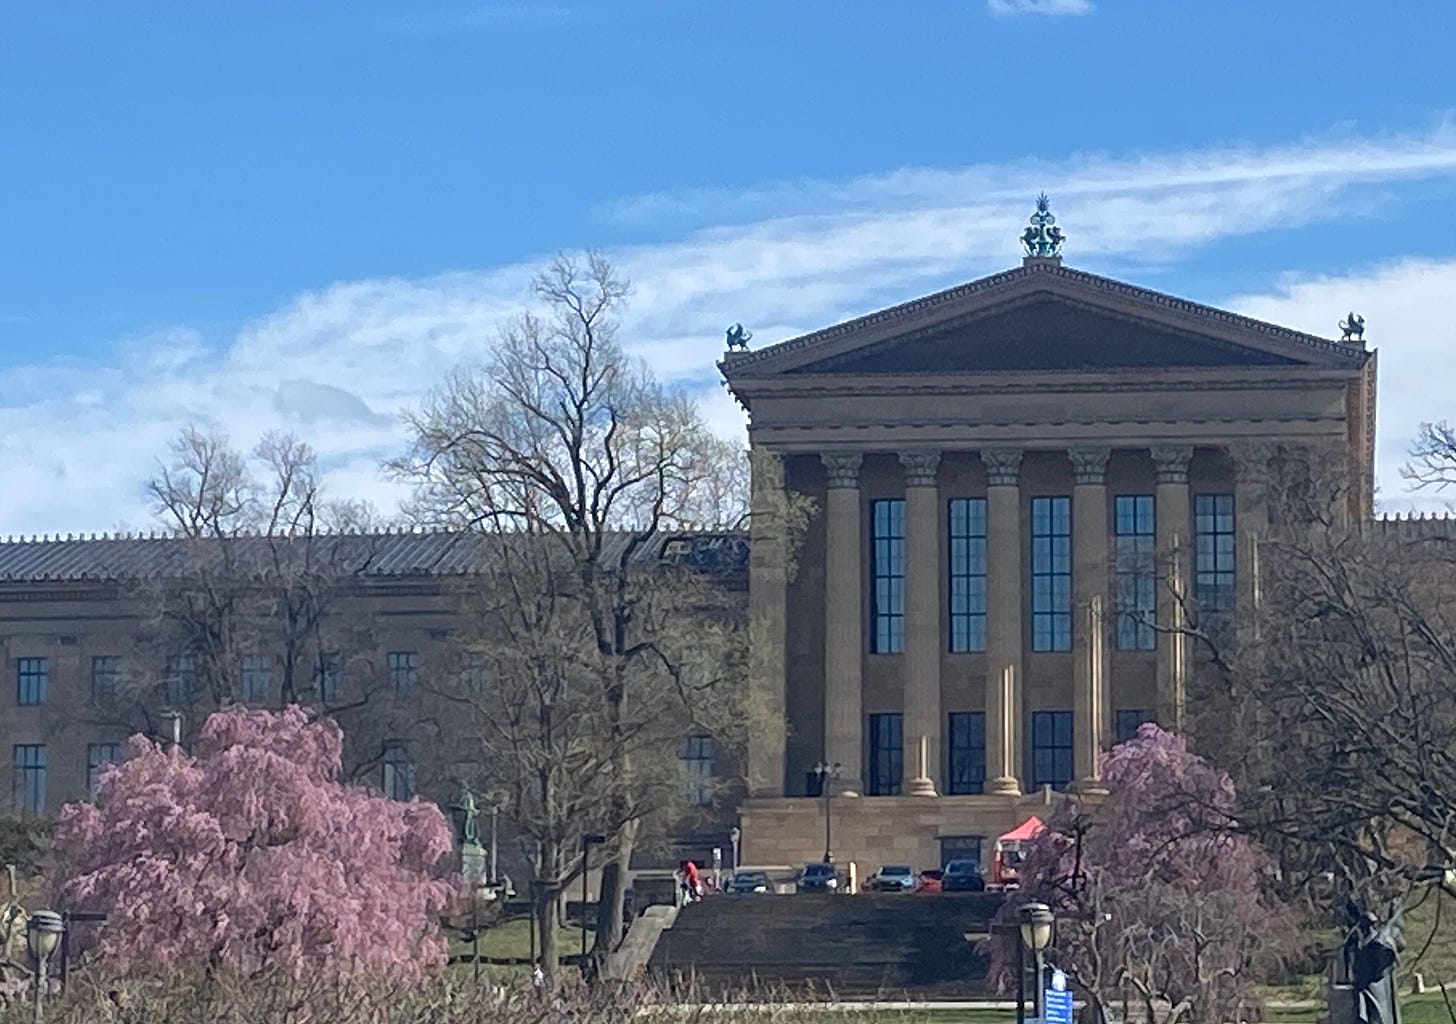 The back of the Philadelphia Ar Museum, a building with tall roman columns. In fron tof the museum are two blooming cherry tress.